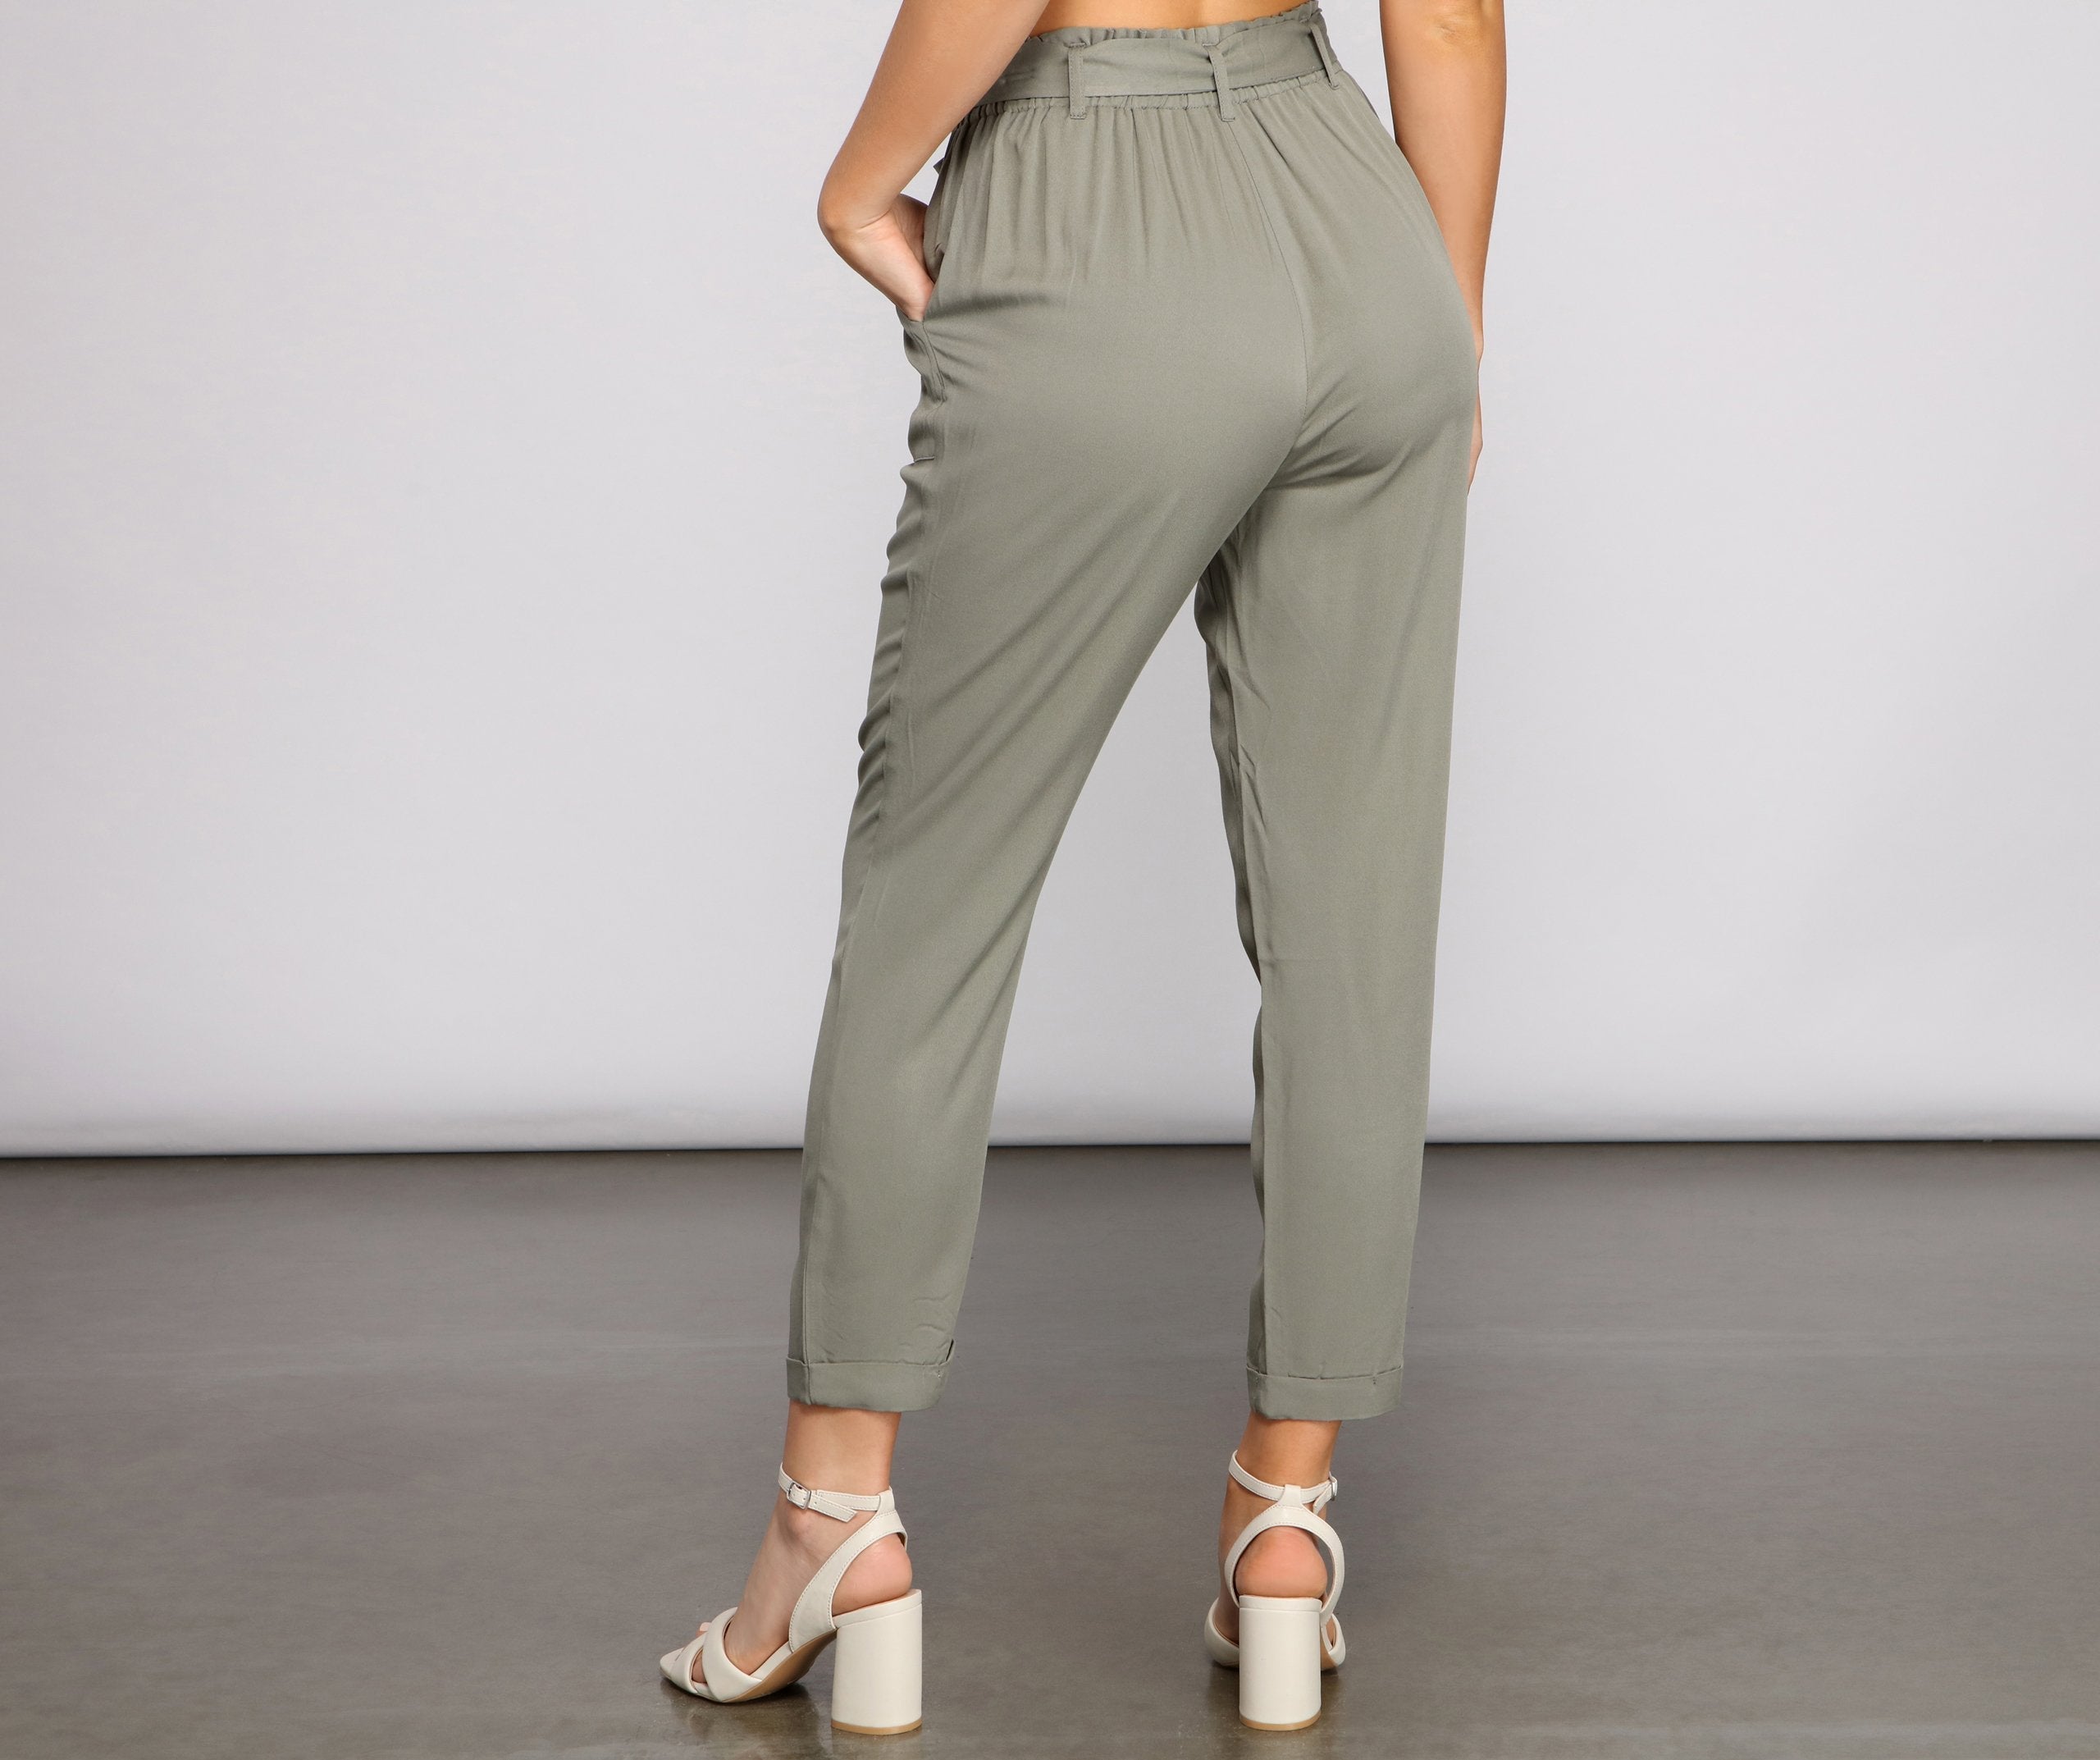 Trendsetter Tie Waist Paperbag Pants - Lady Occasions